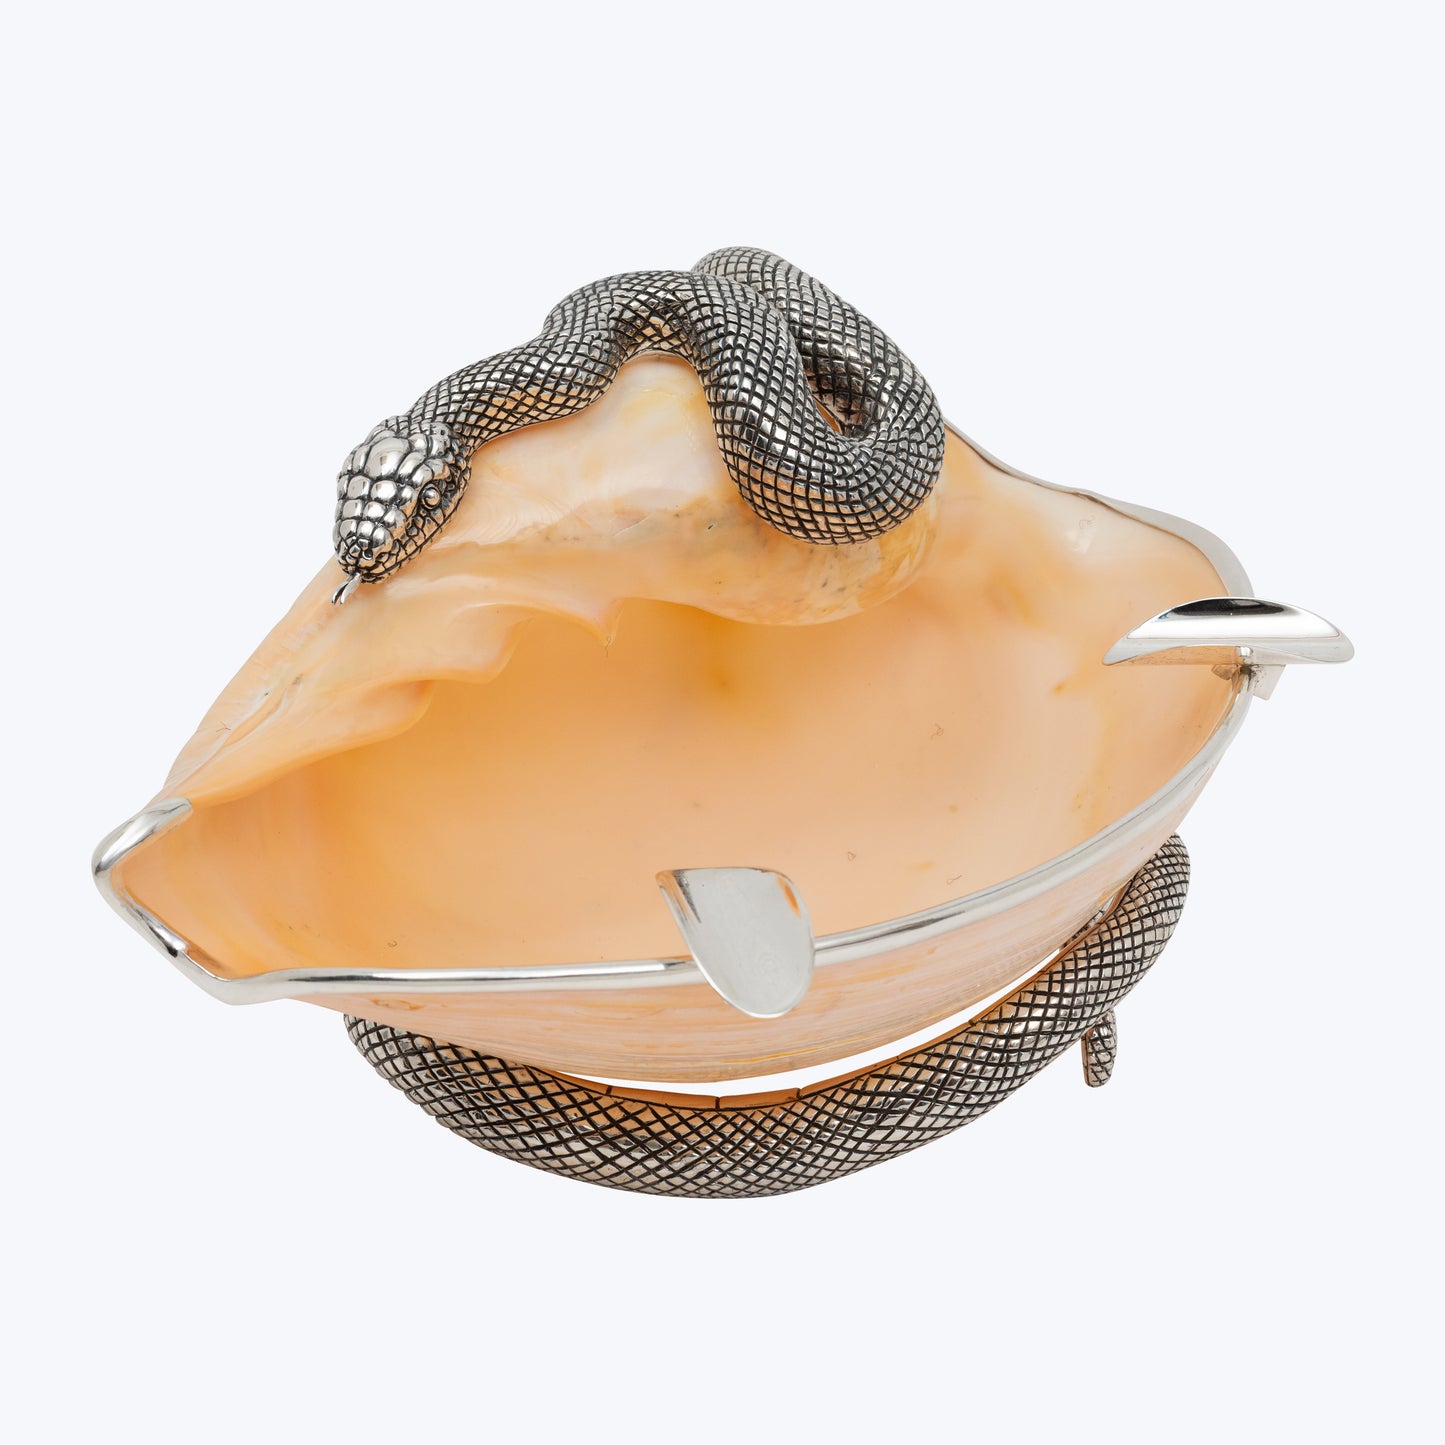 Hissing and Swirling Silver Snake Conch Shell Ashtray